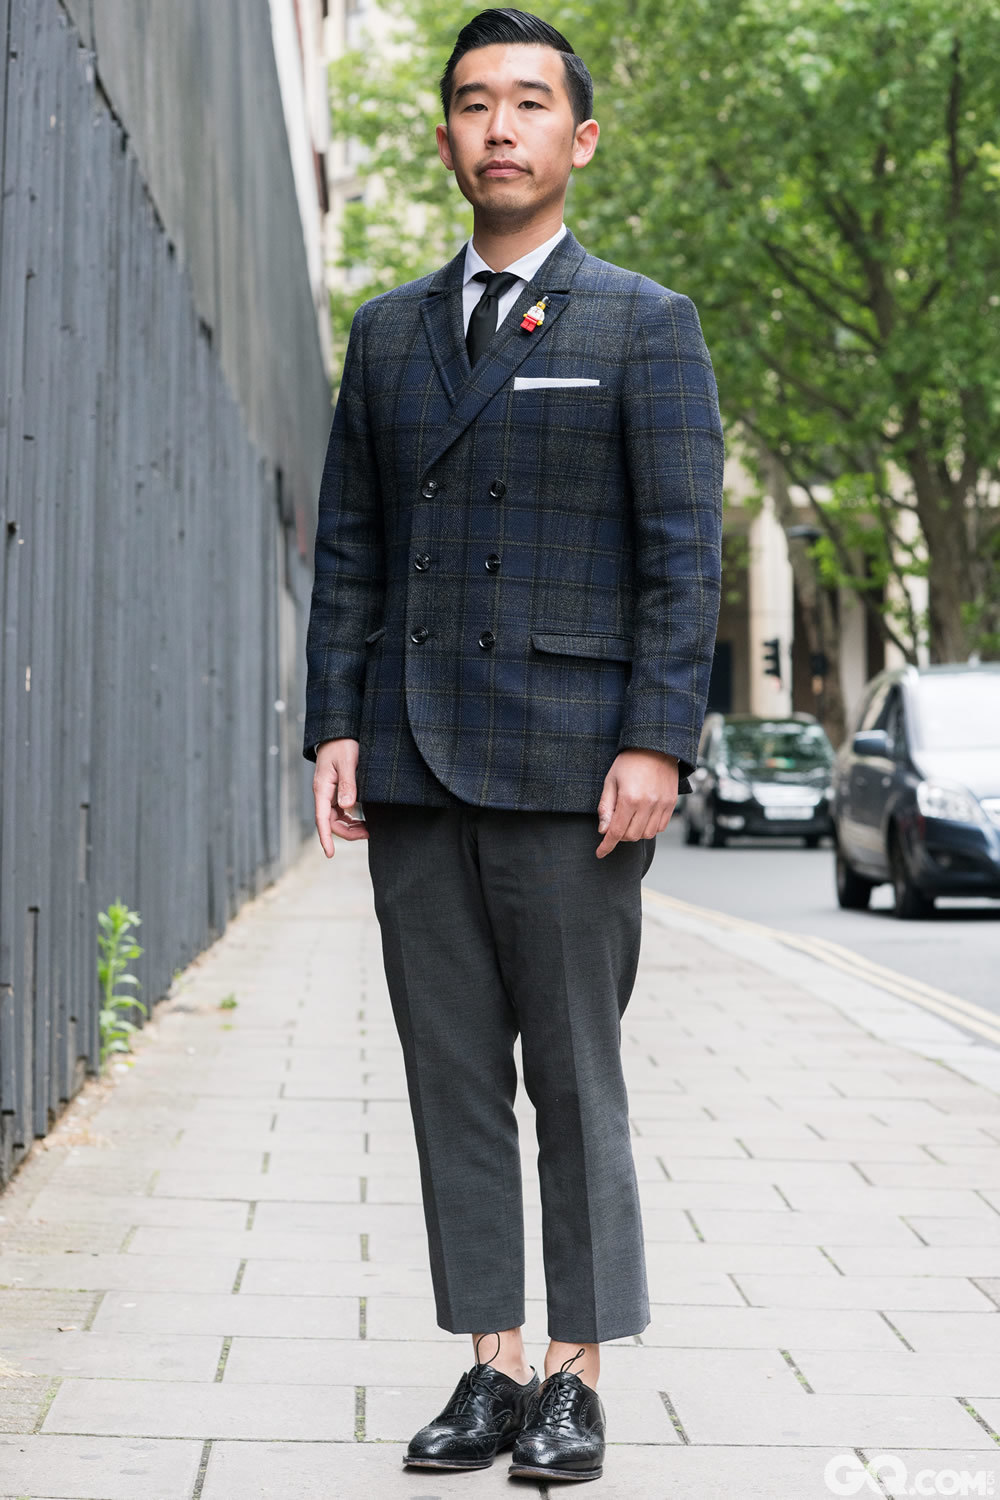 Jun
All Look: Tiger of Sweden
Shoes: vintage


Inspiration: My inspiration today was classic British tailoring with a  Japanese influence with a nice grey/blue contrast.
(我今天的灵感来源于经典英式定制与日本元素的结合。)